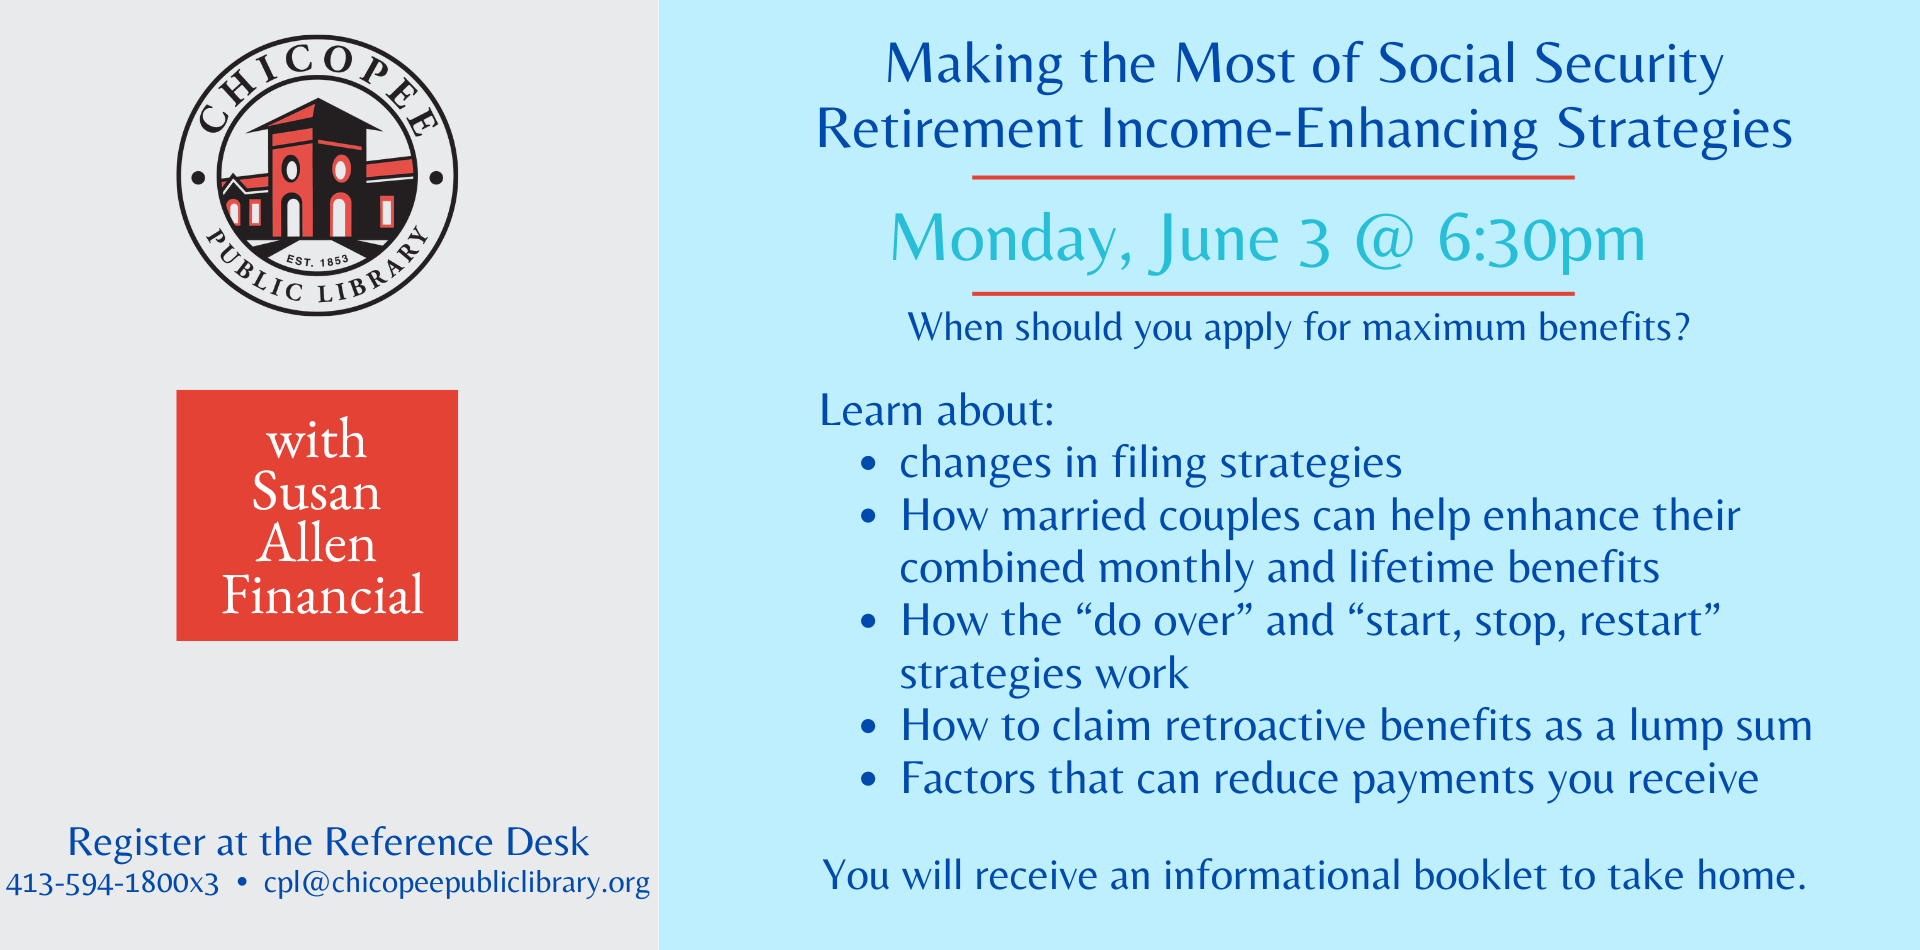 Join us for an information session on Social Security on June 3 at 6:30pm Registration is required.